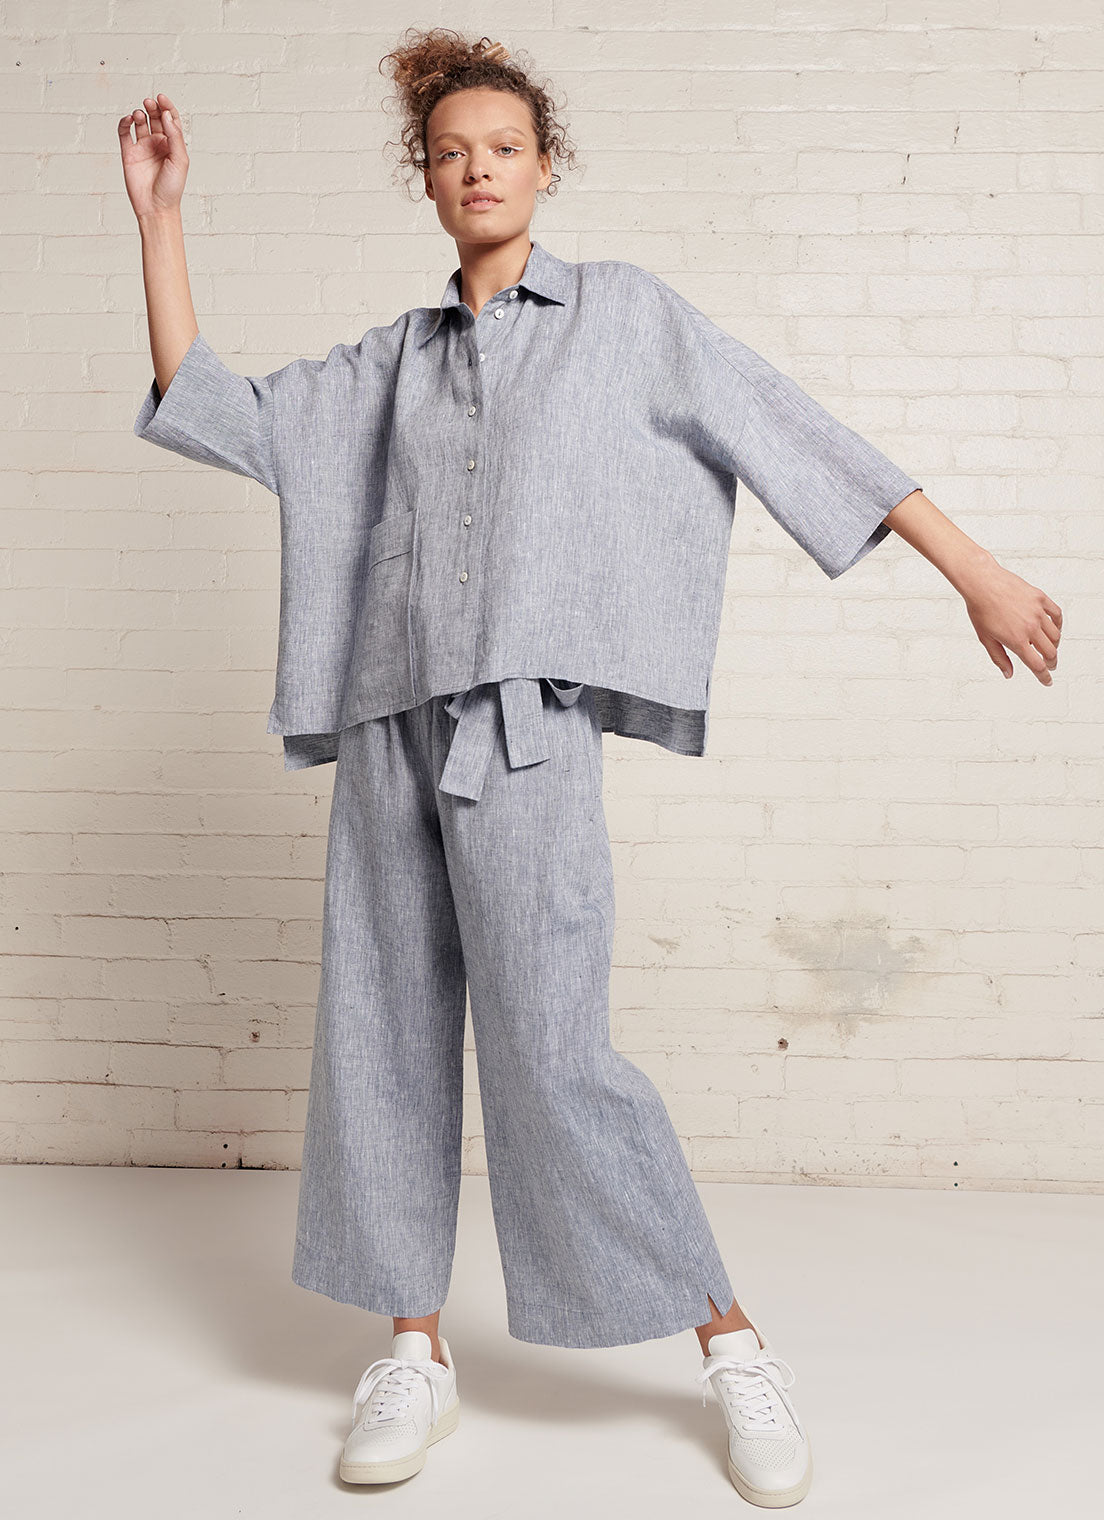 A denim, loose fitting crop pants with elasticated waistband and tie belt of the same fabric made from yarn dye washed linen